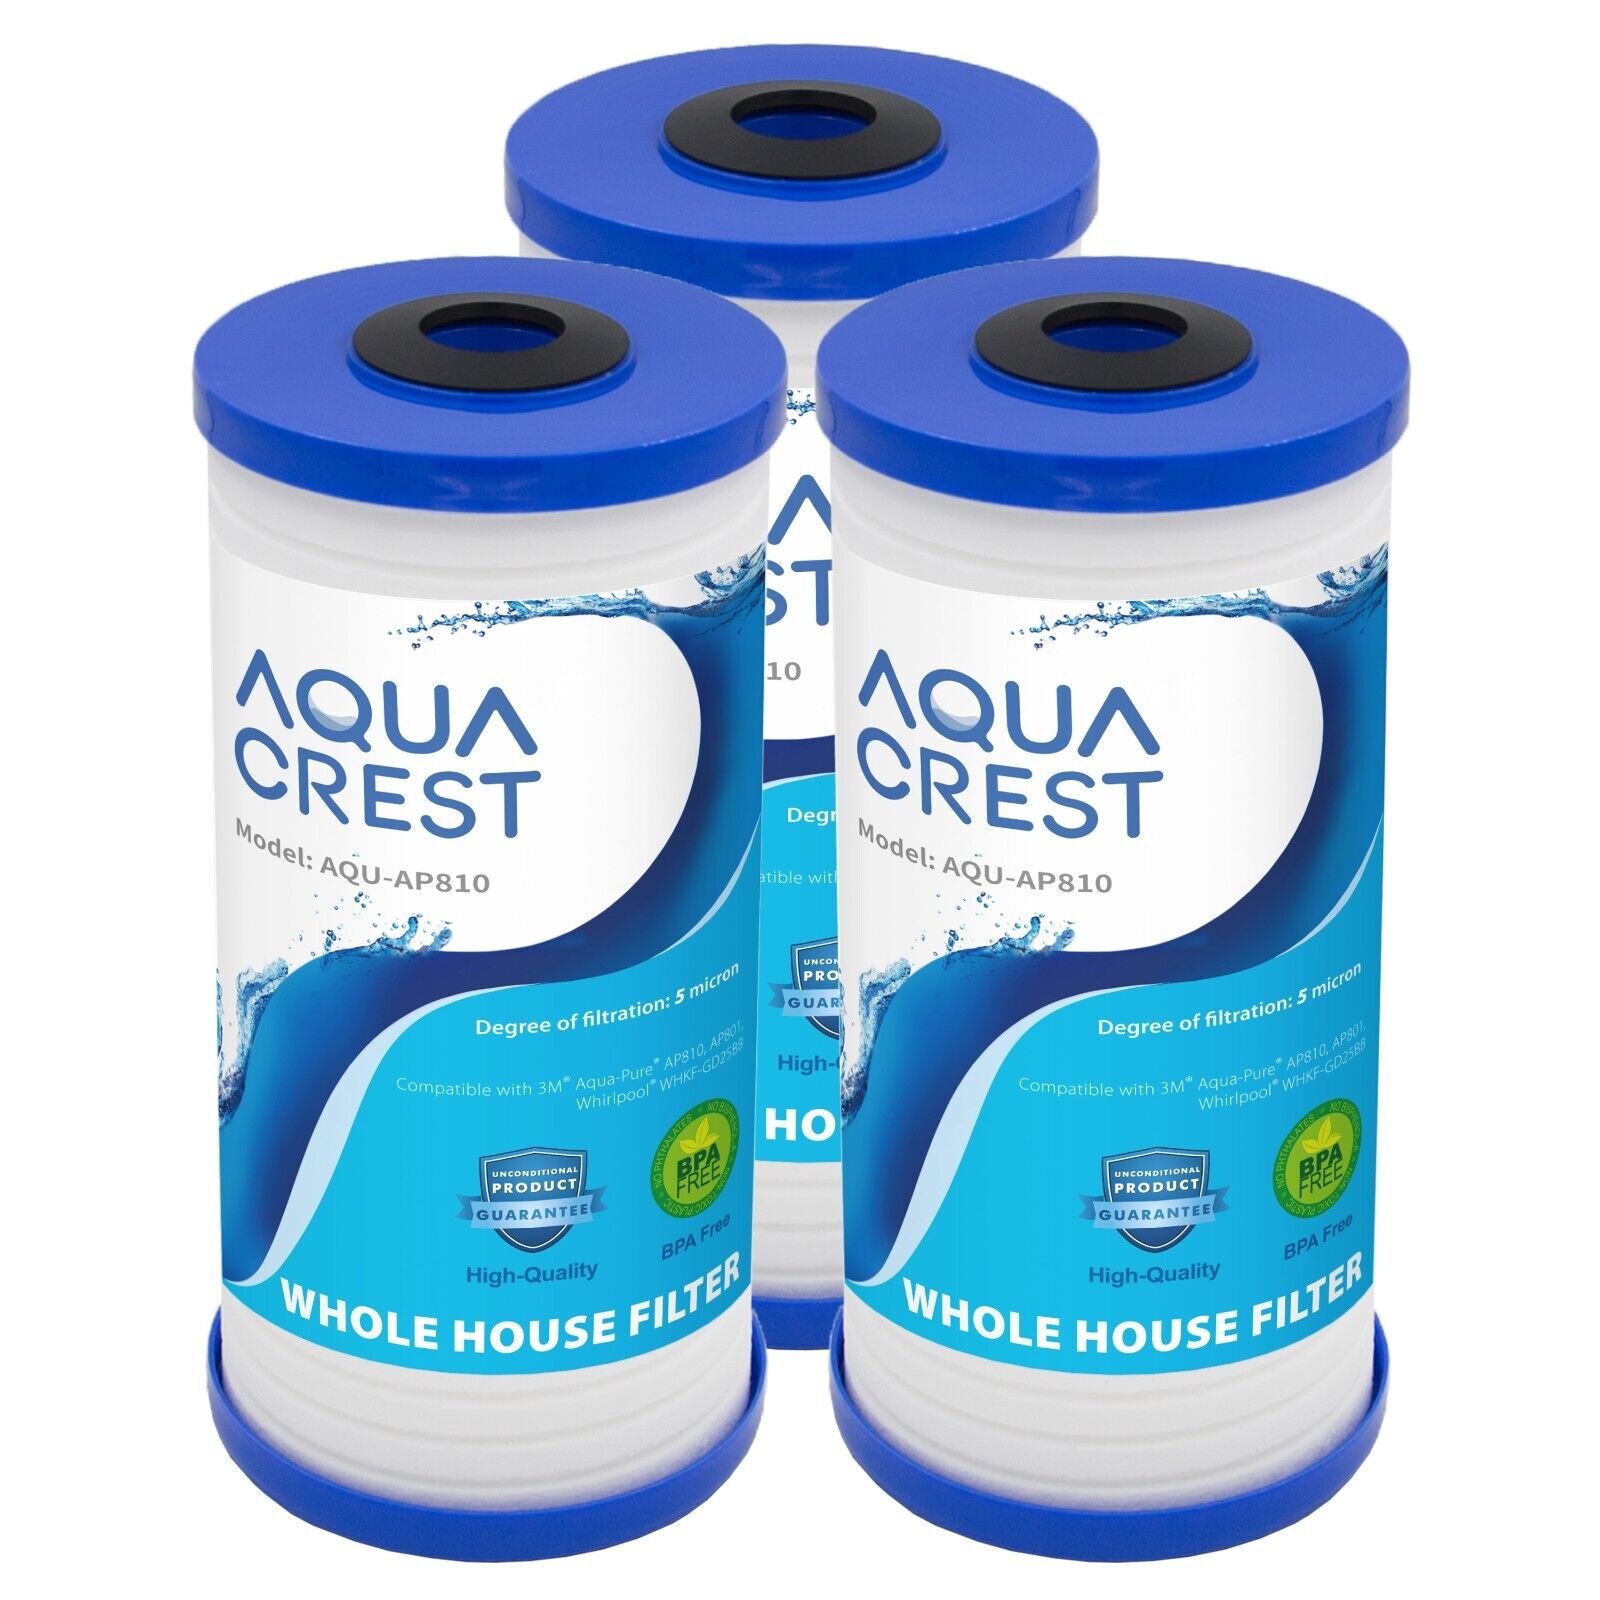 AQUACREST AP810 Whole House Water Filter, Replacement for 3M